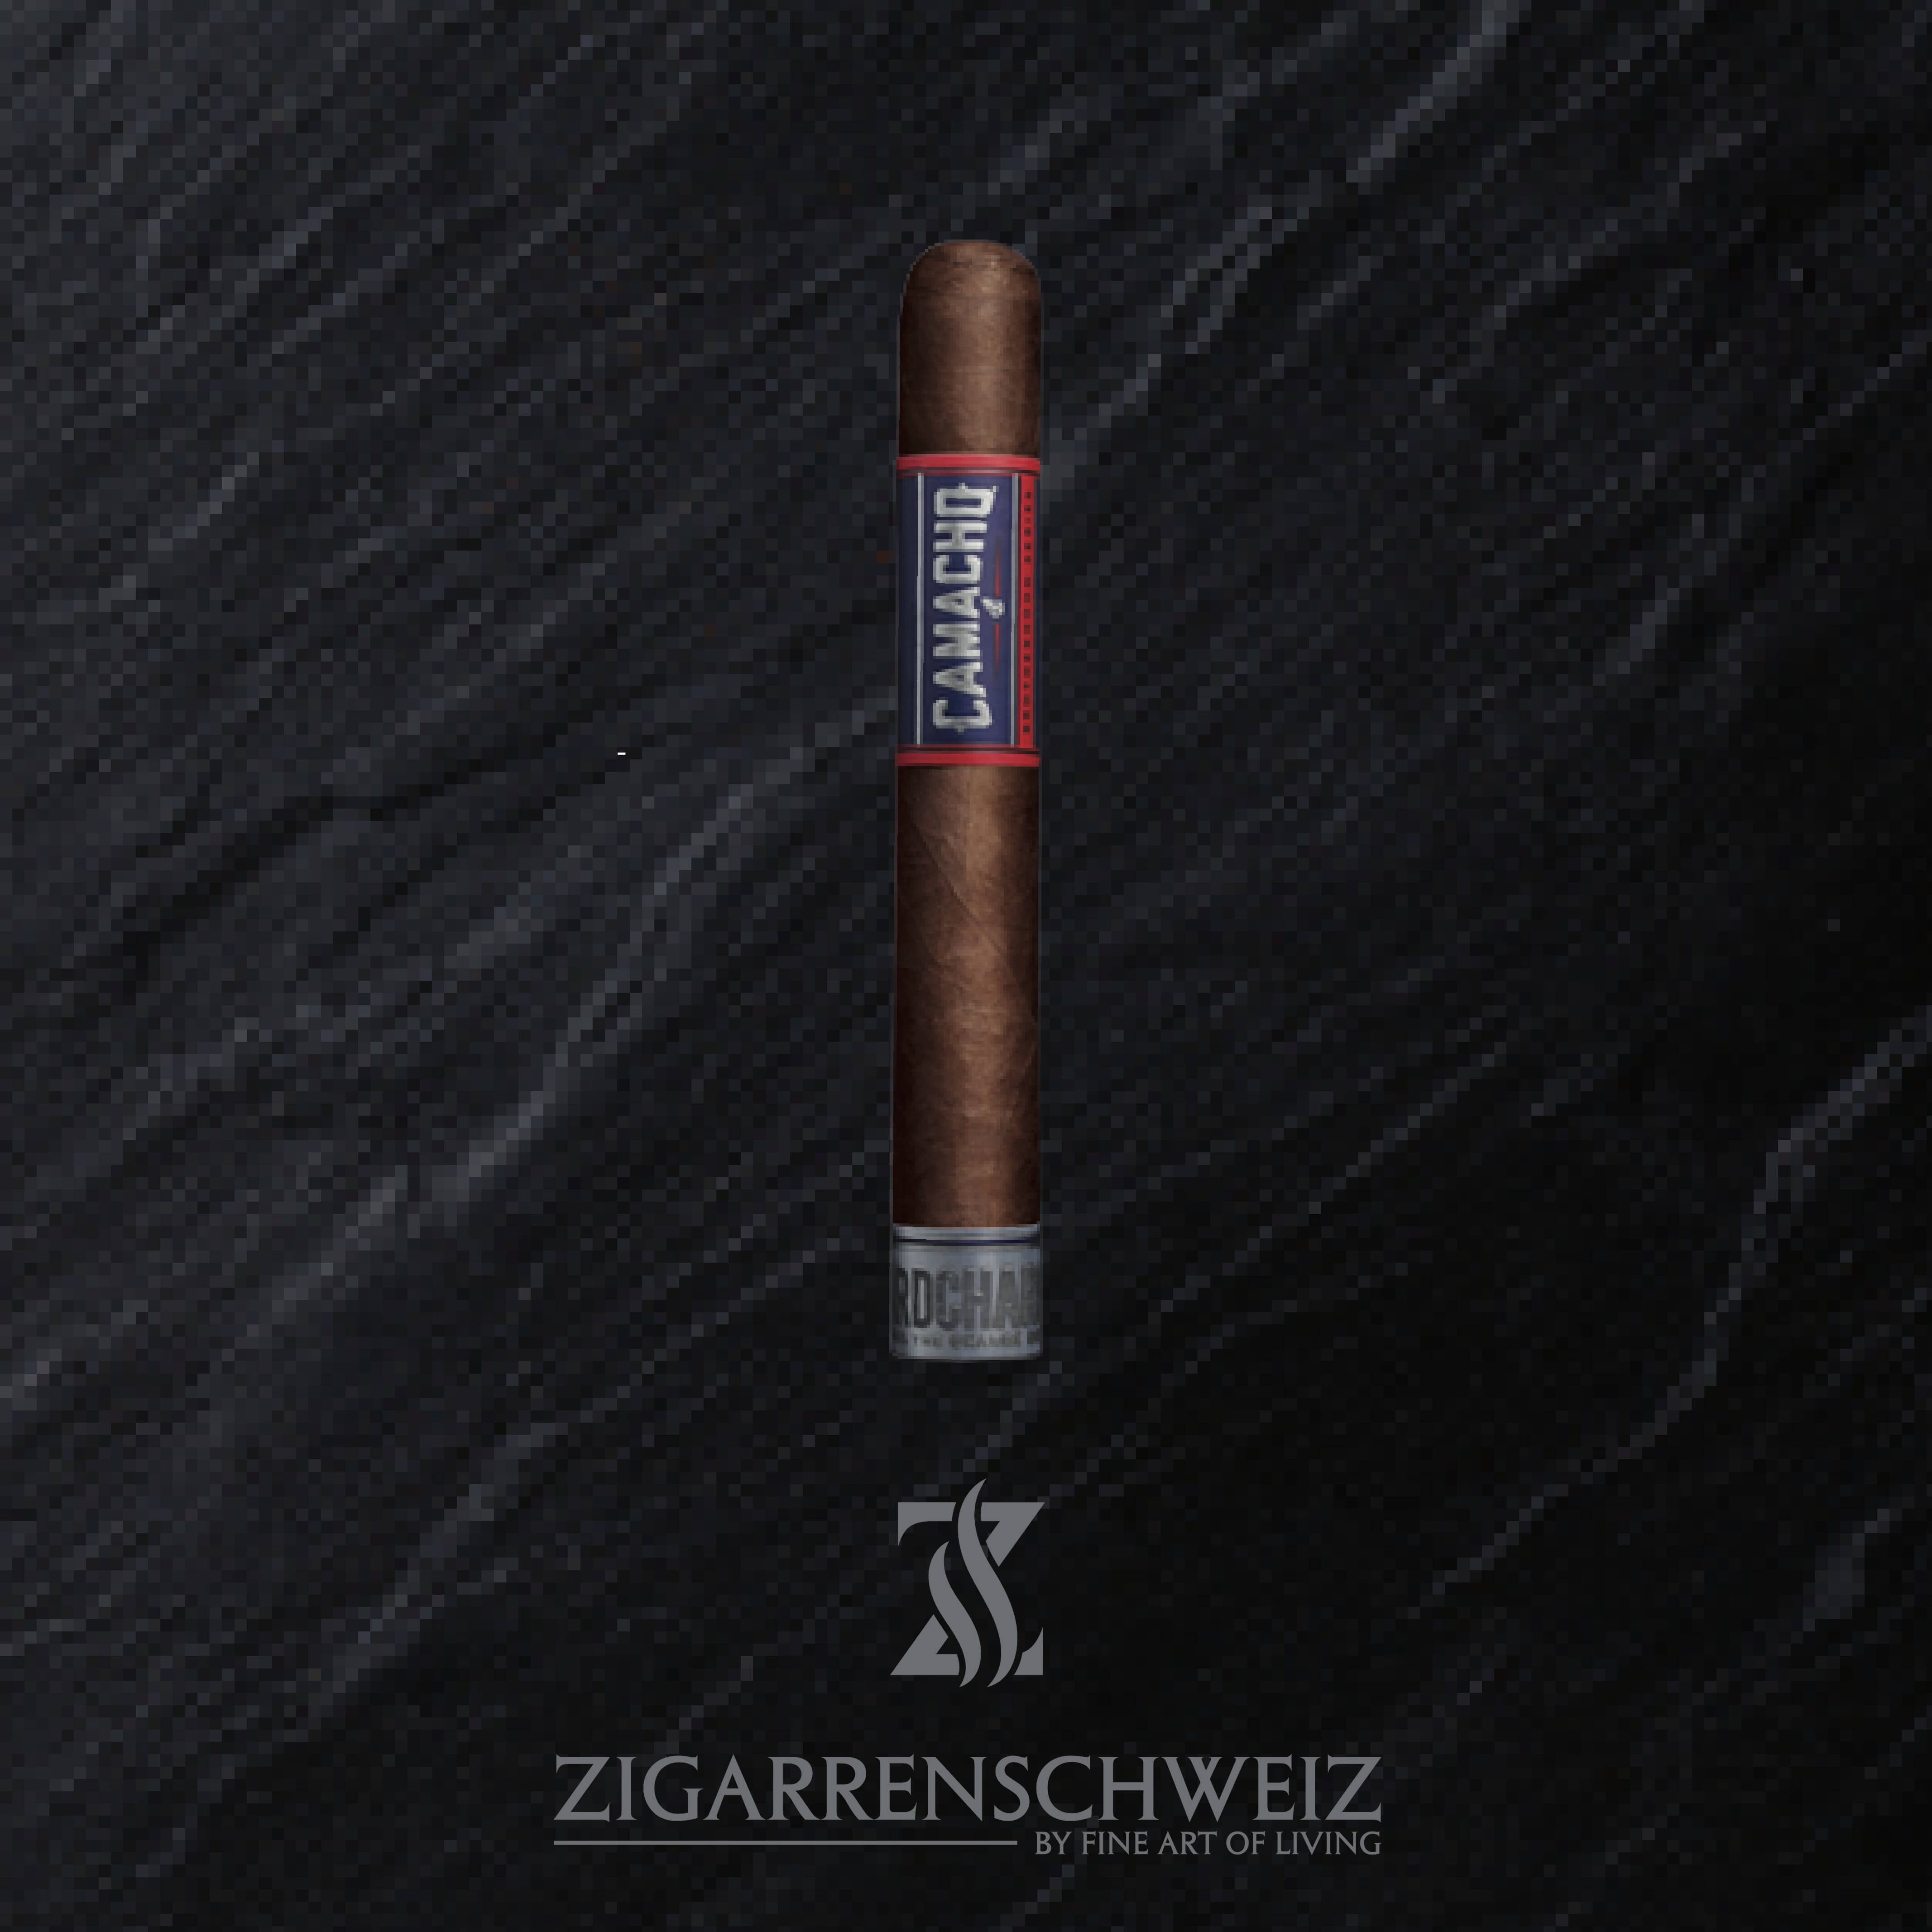 Camacho Hardcharger Special Toro Selection 2019 Zigarre